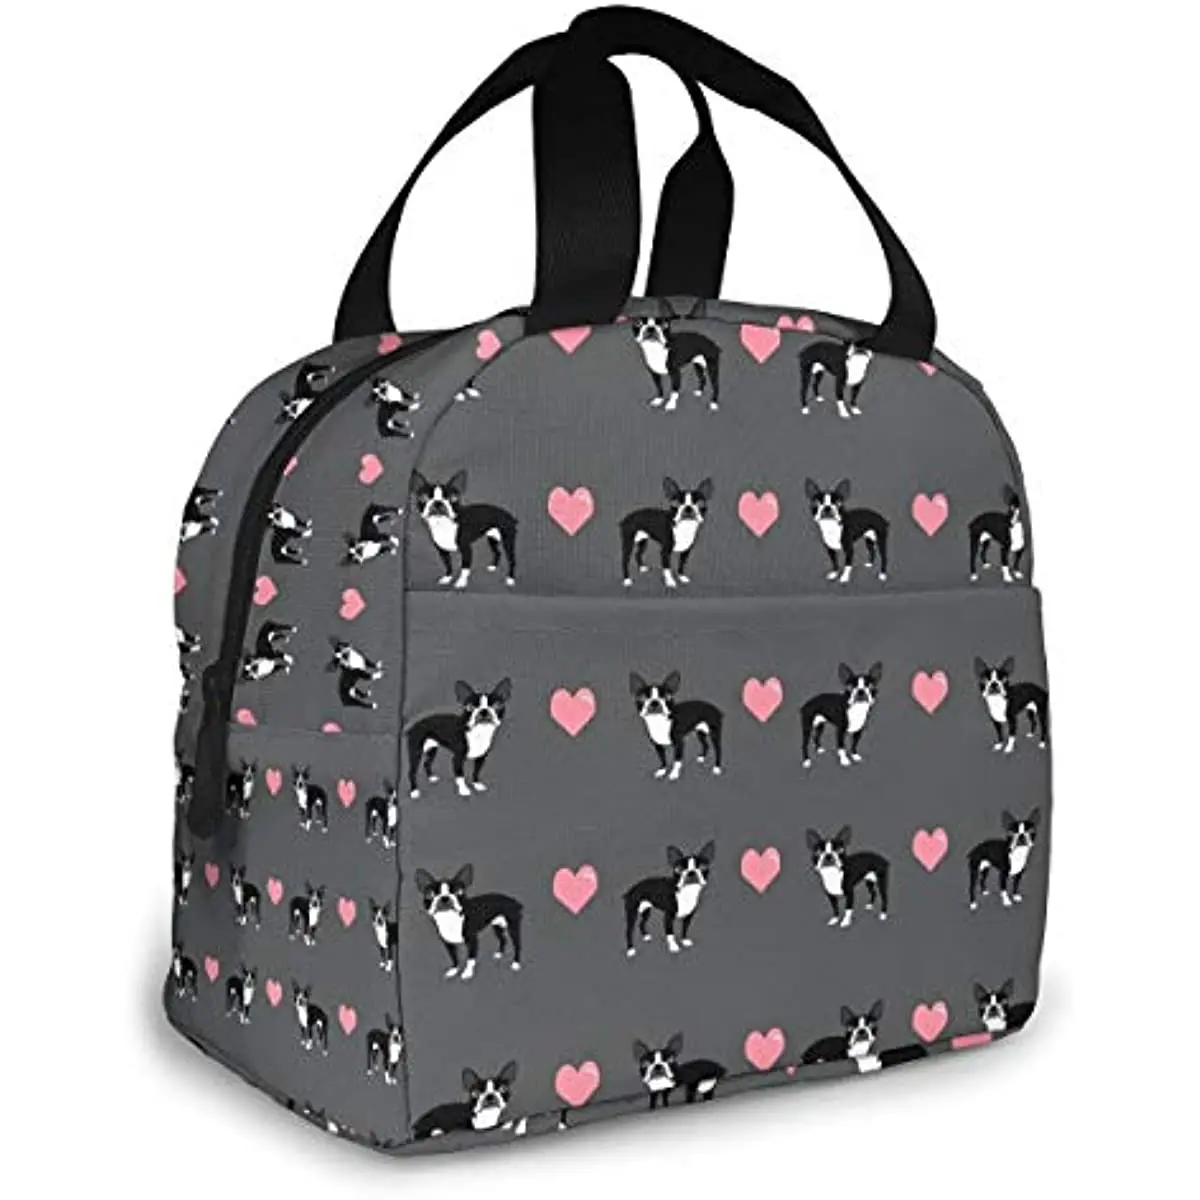 

Boston Terrier Insulated Lunch Bag Portable Thermal Cooler Box Reusable Picnic Tote Bento Bag for Men Women Kids Work School